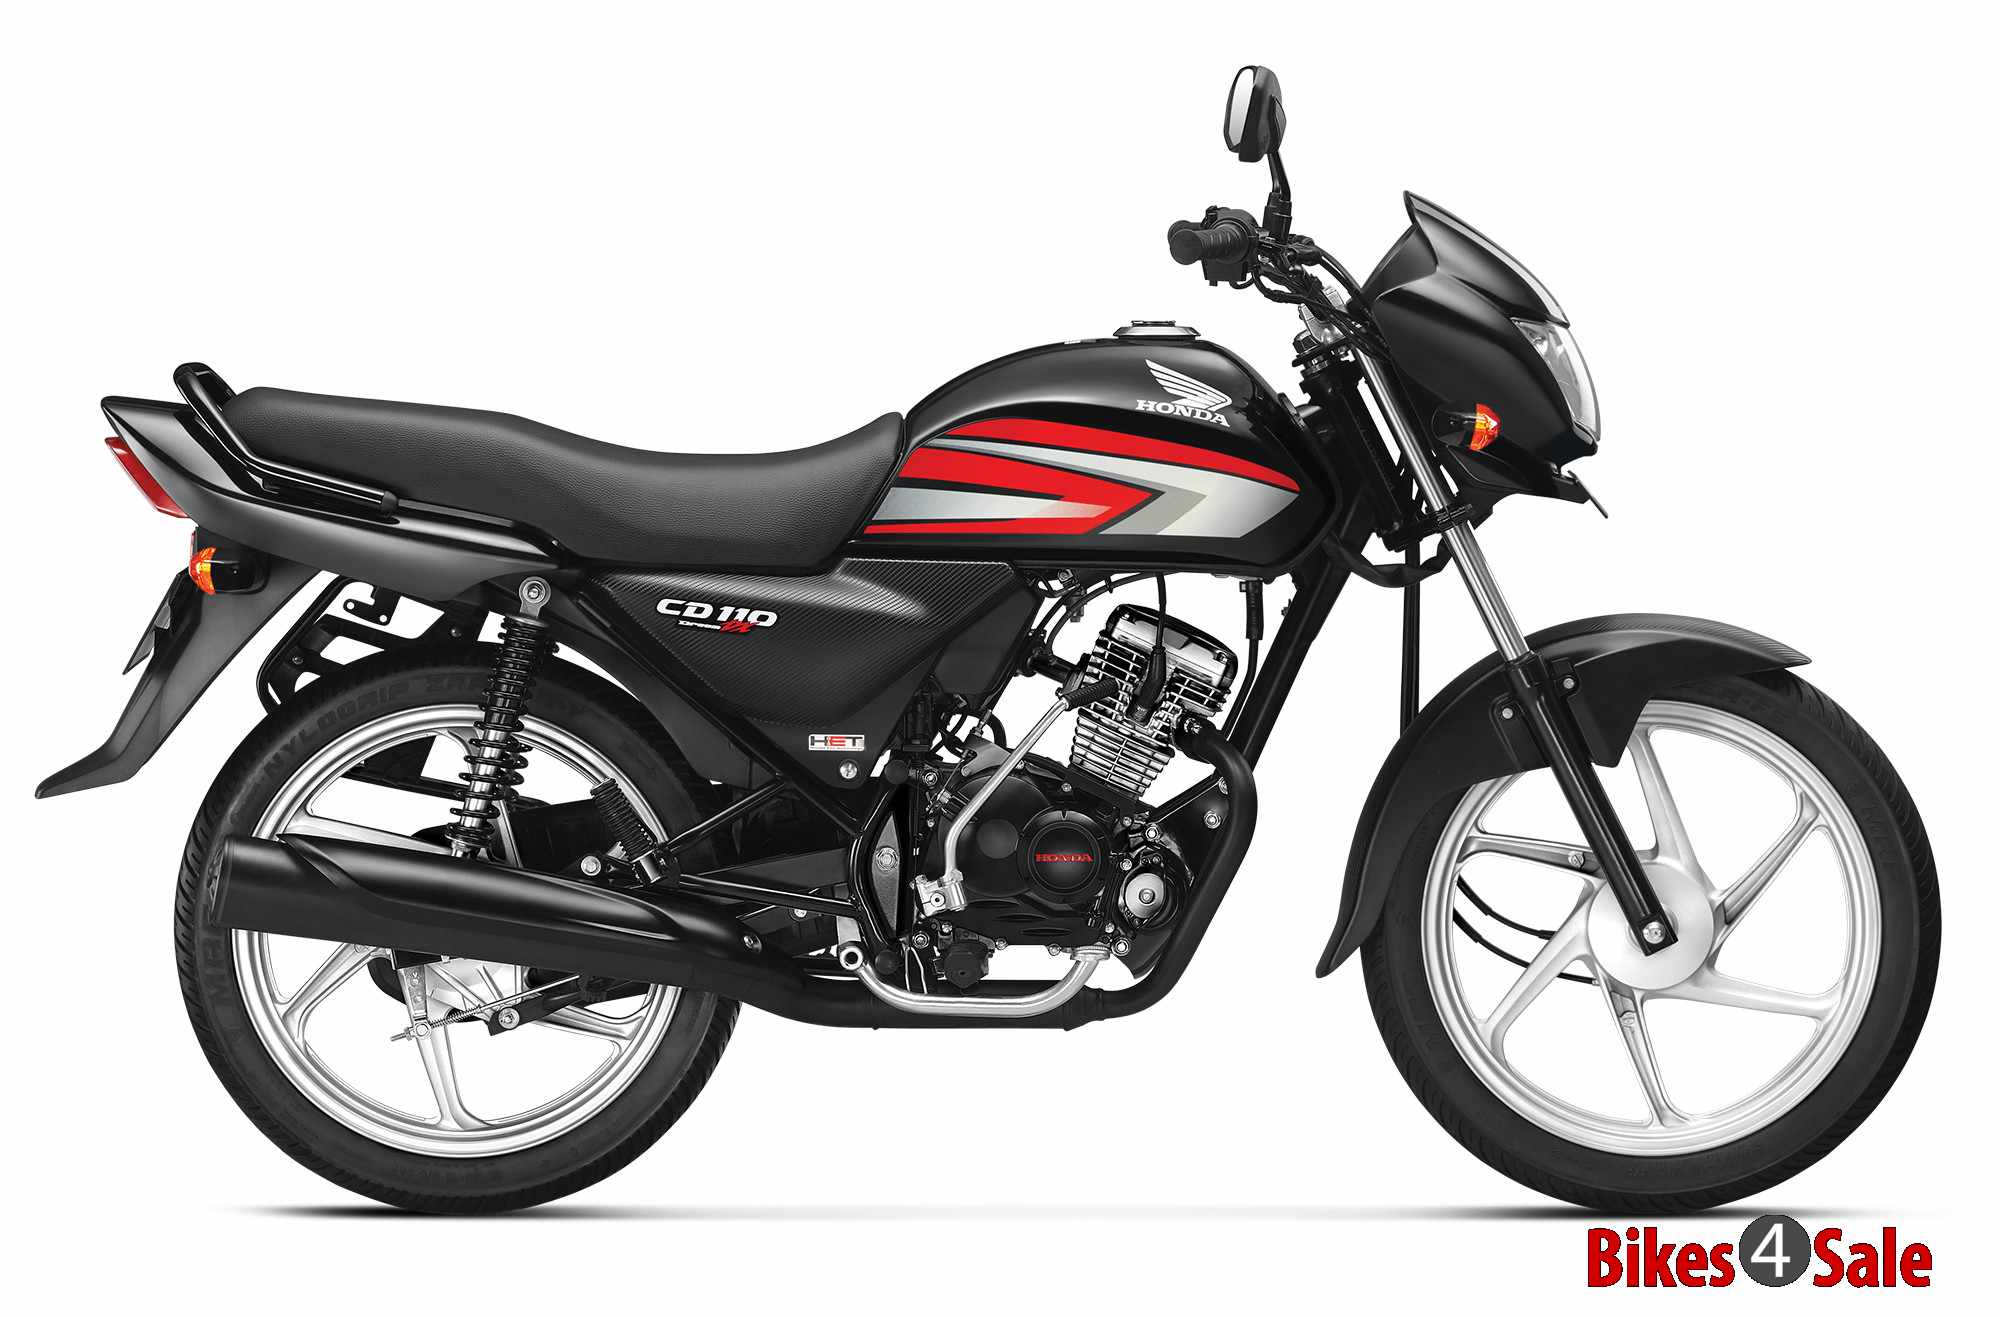 Honda CD 110 Dream DX - Black with Red Graphics